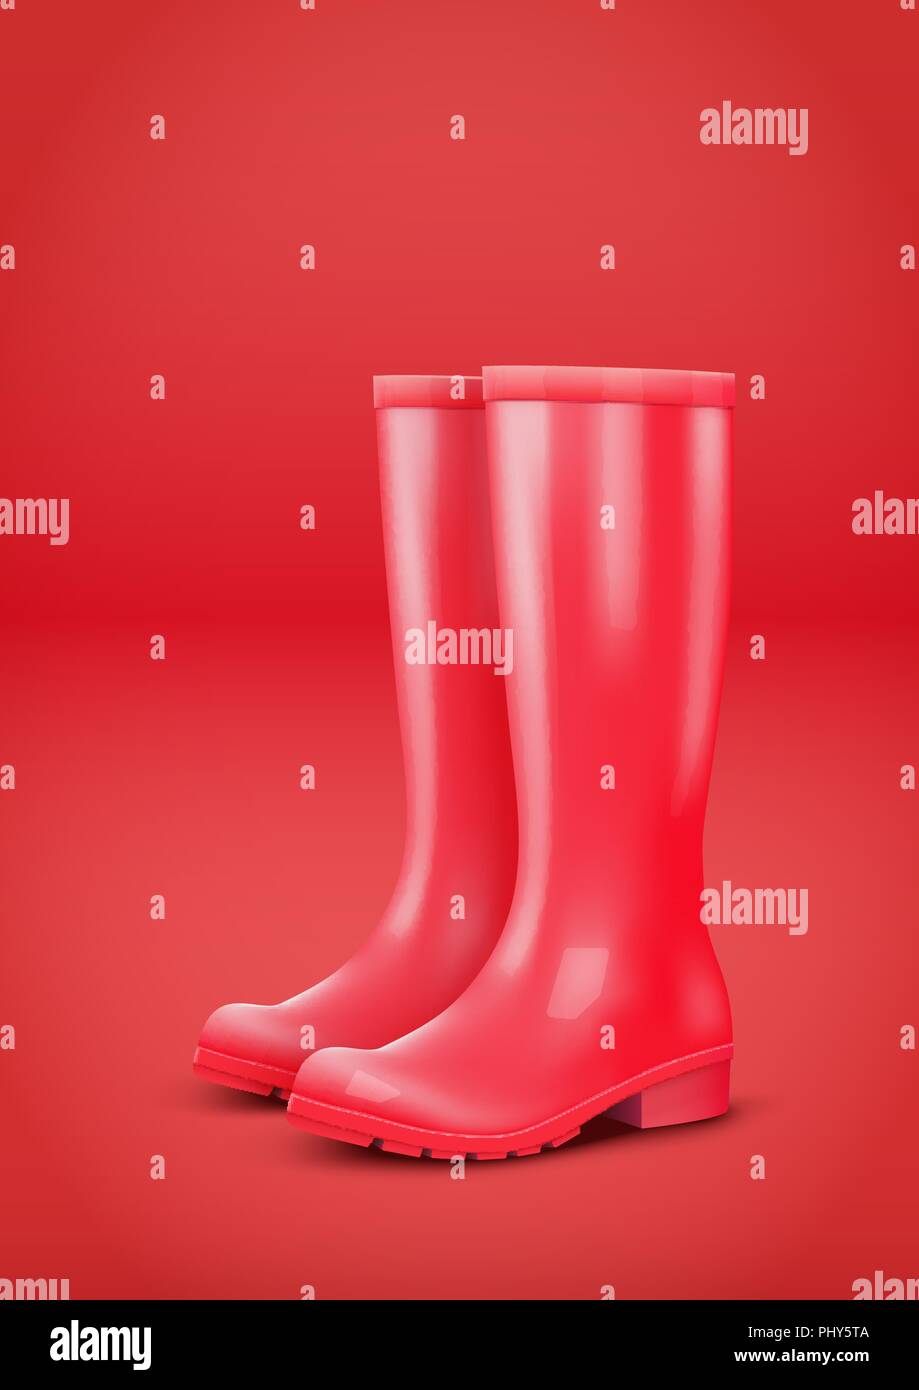 Boots Stock Vector Images - Alamy